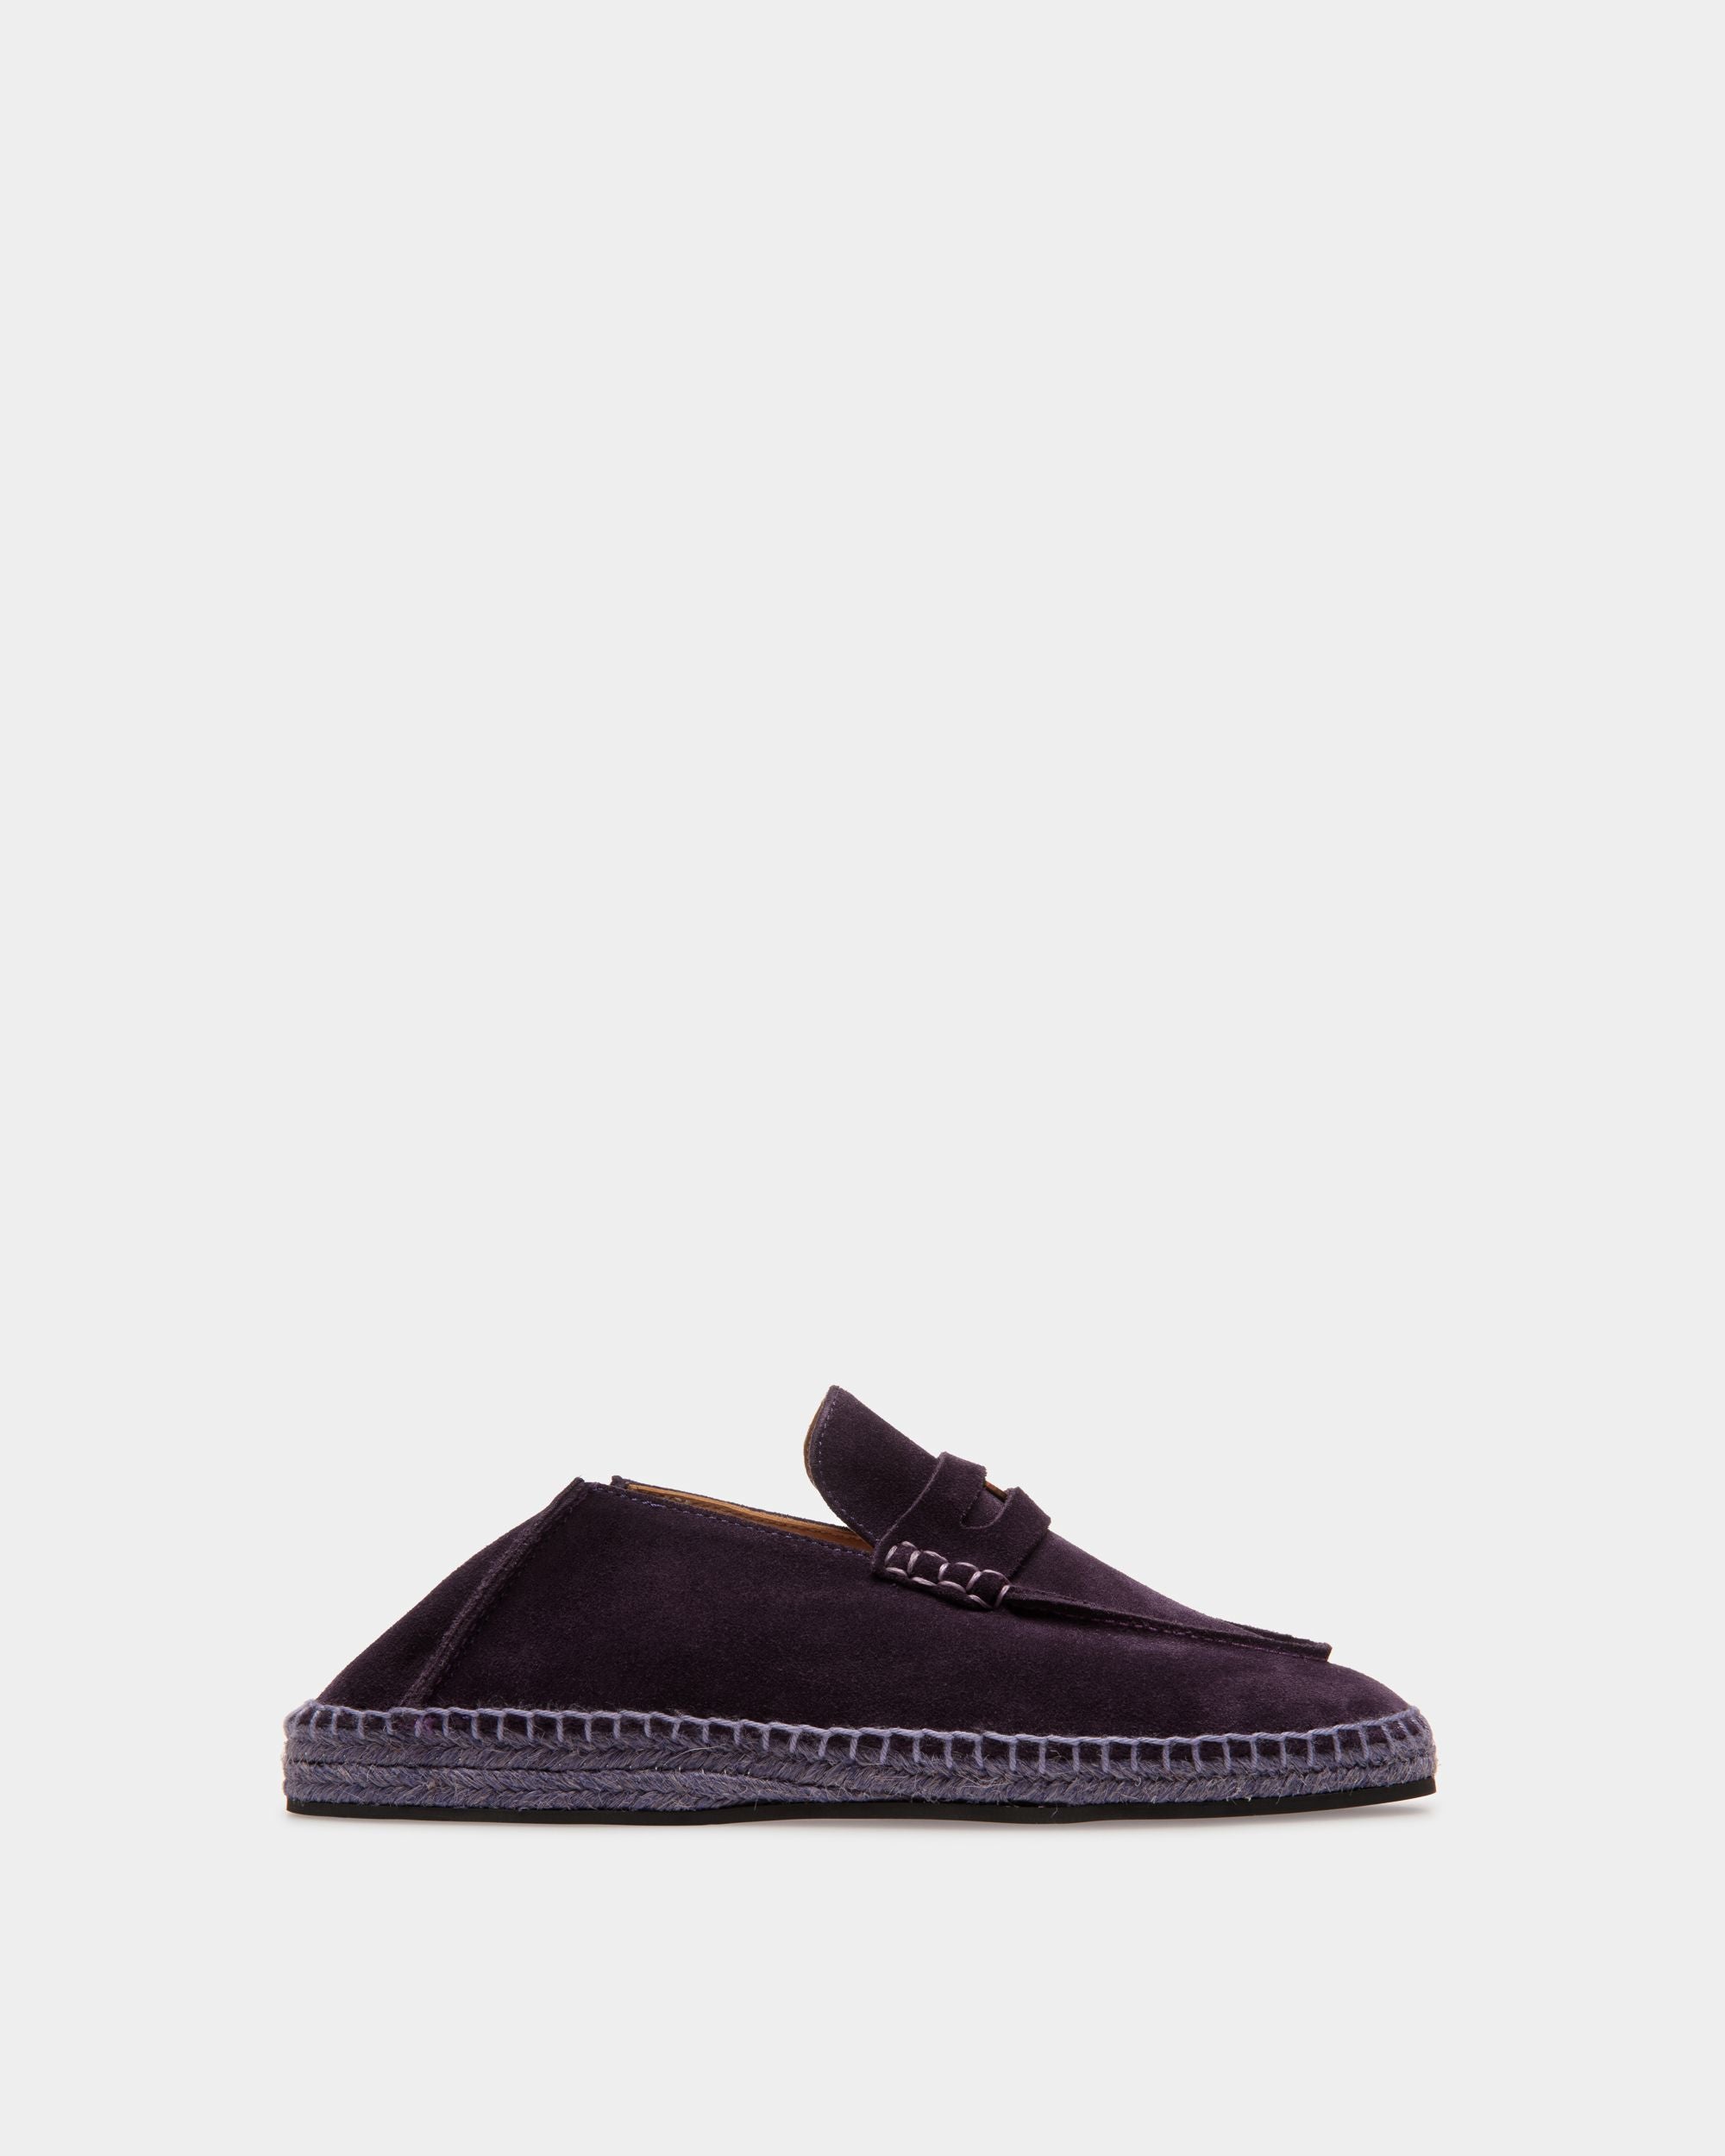 Kolby | Women's Espadrilles | Orchid Leather | Bally | Still Life Side